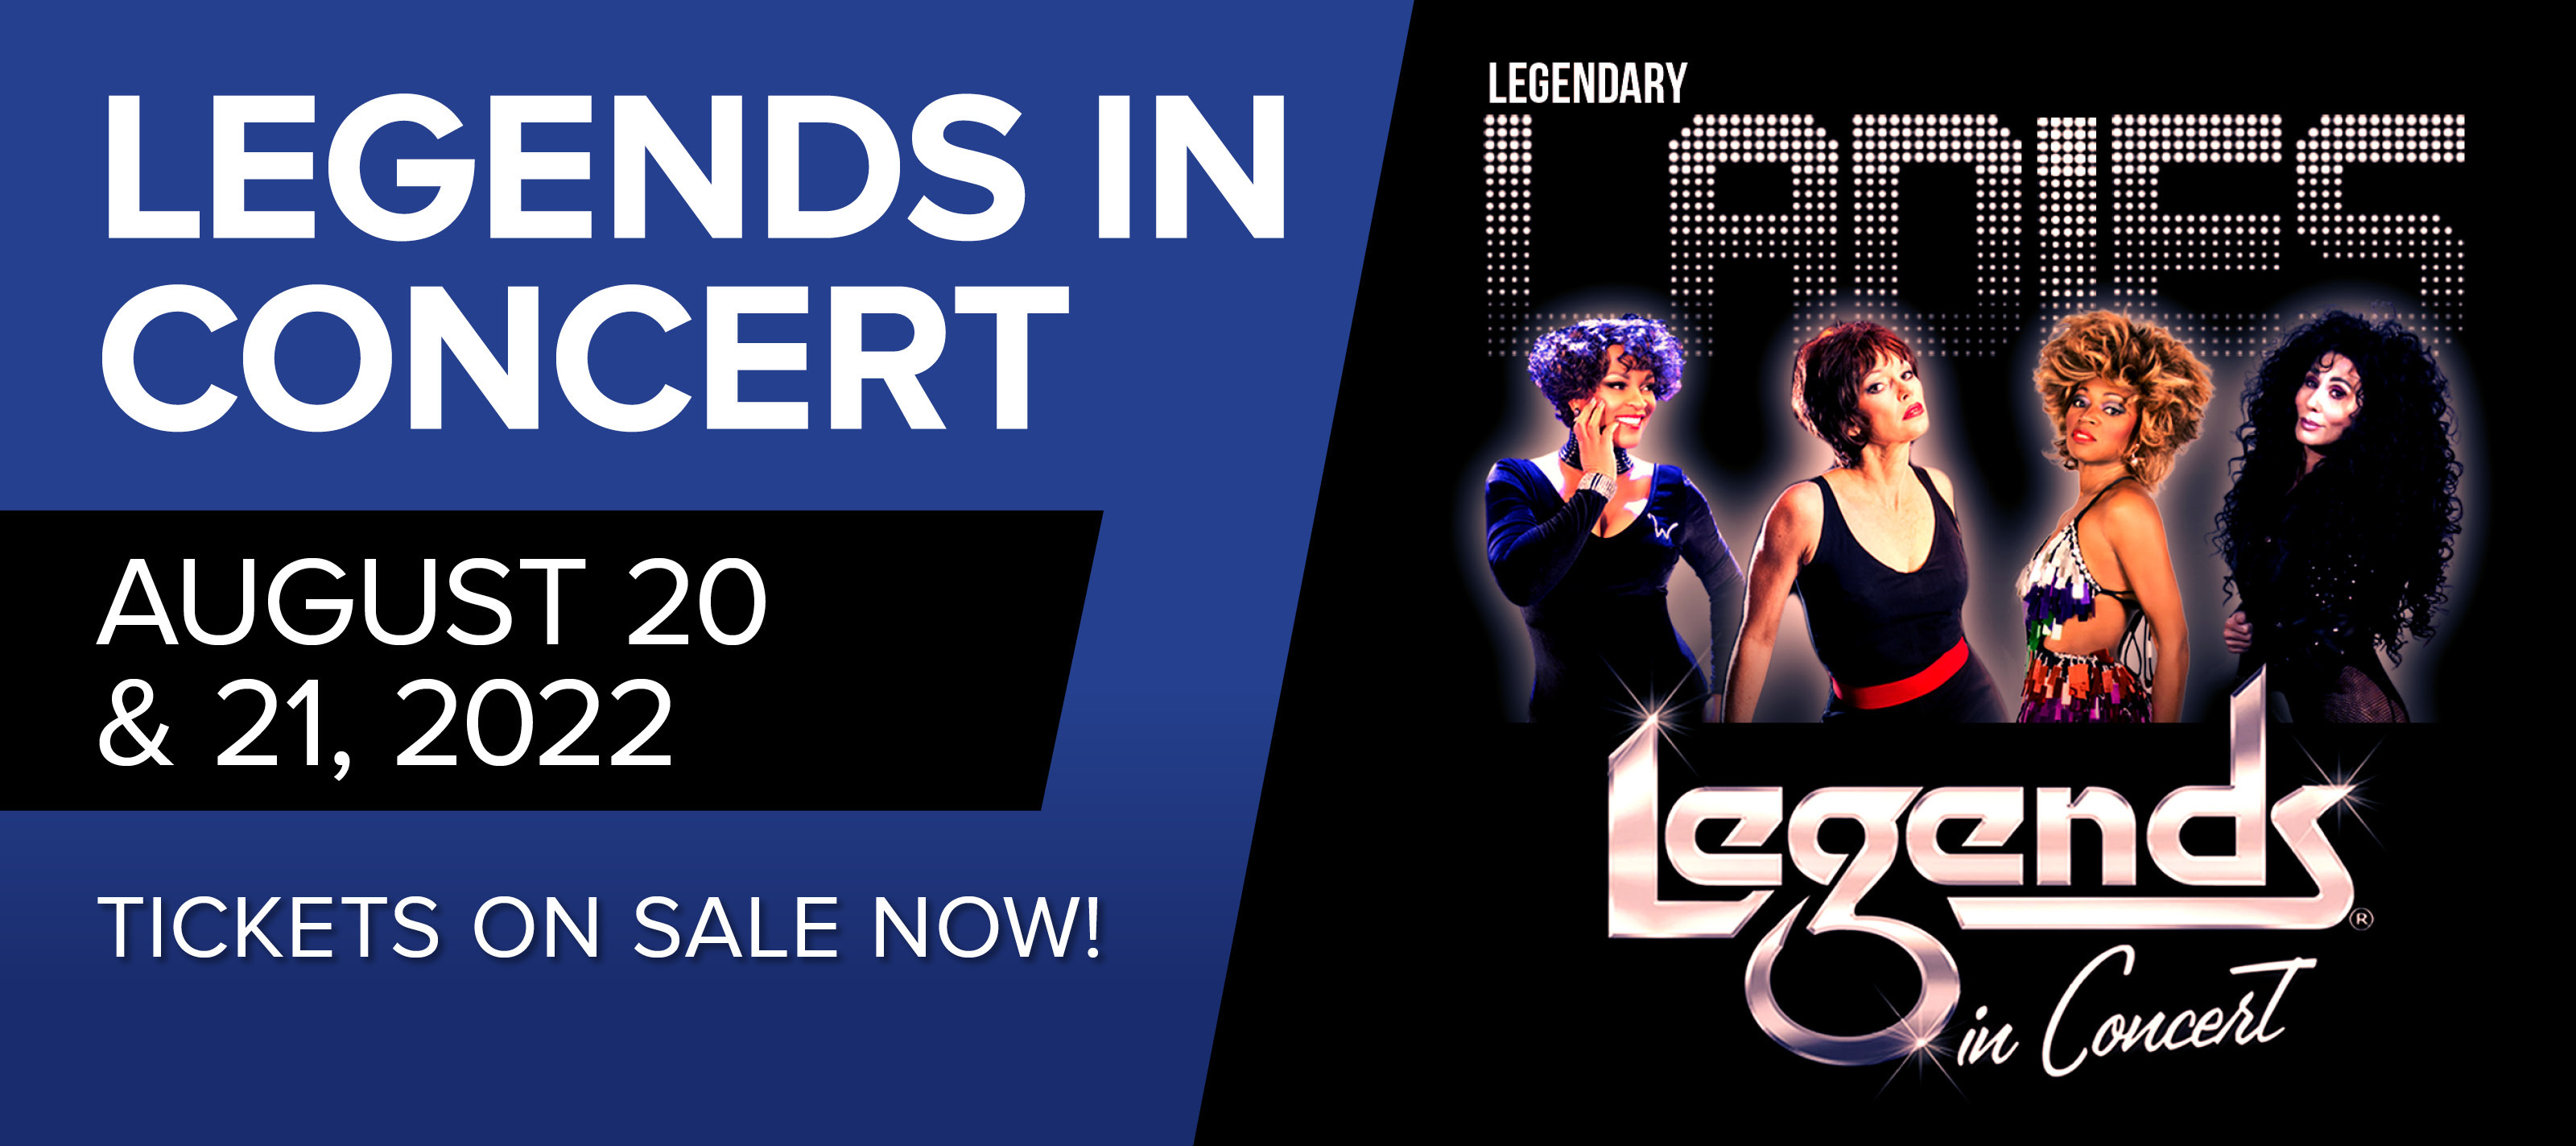 legends in concert august 20 & 21 tickets on sale now